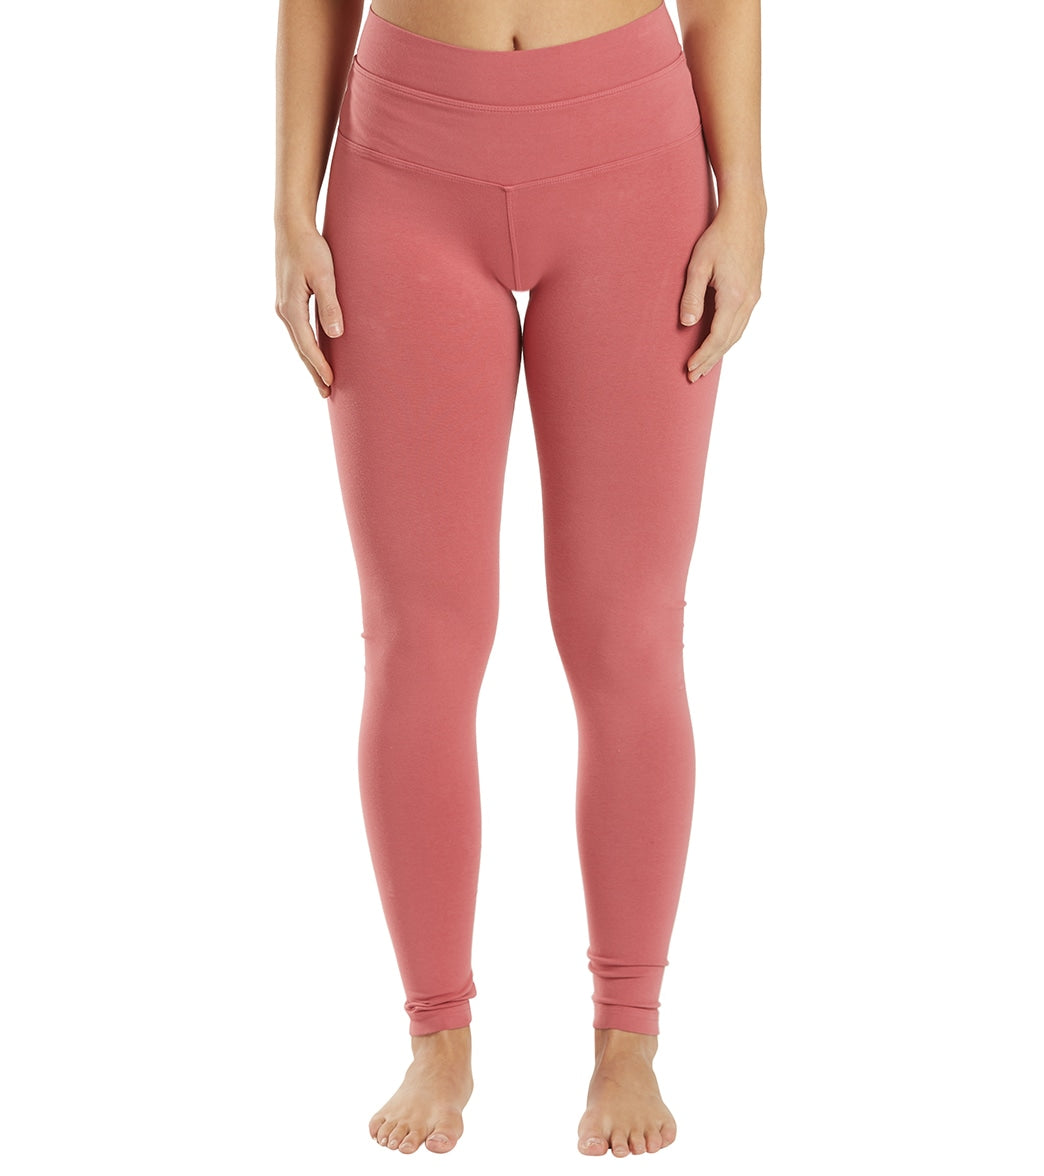 Hard Tail High Waisted Cotton Ankle Yoga Leggings